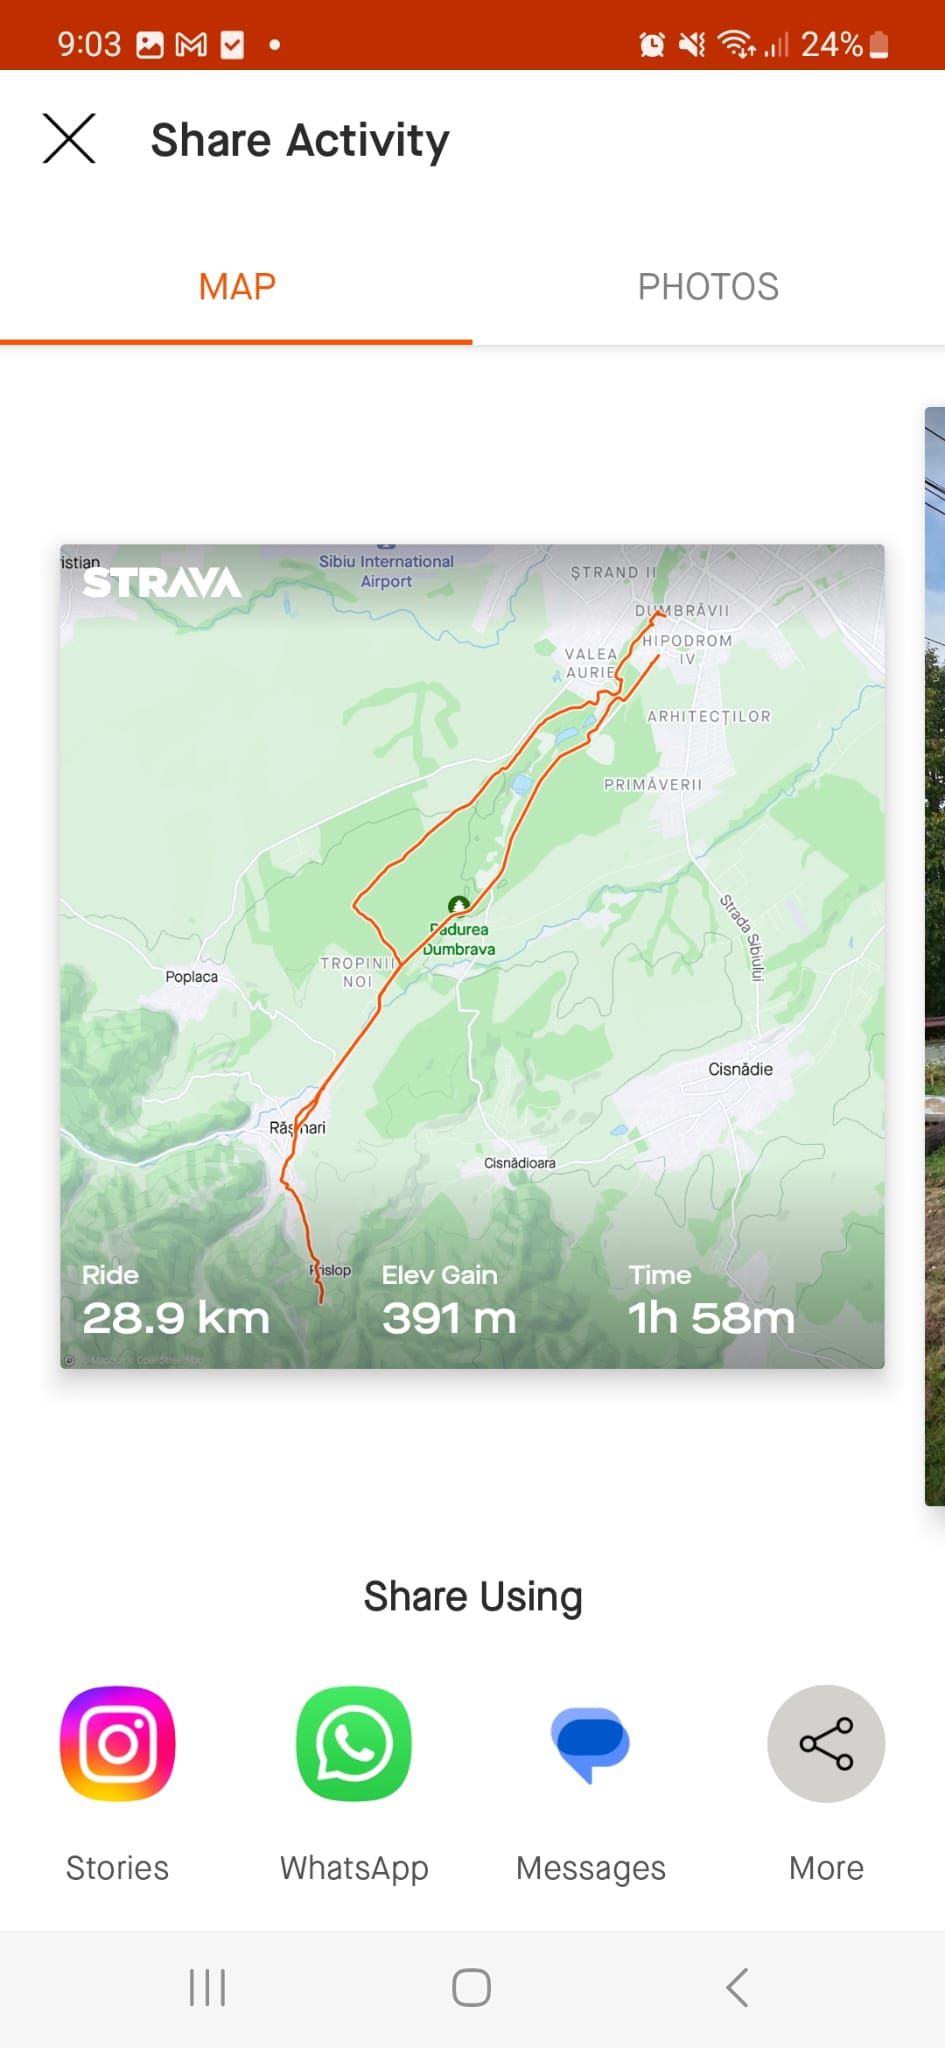 Share Strava routes with friends